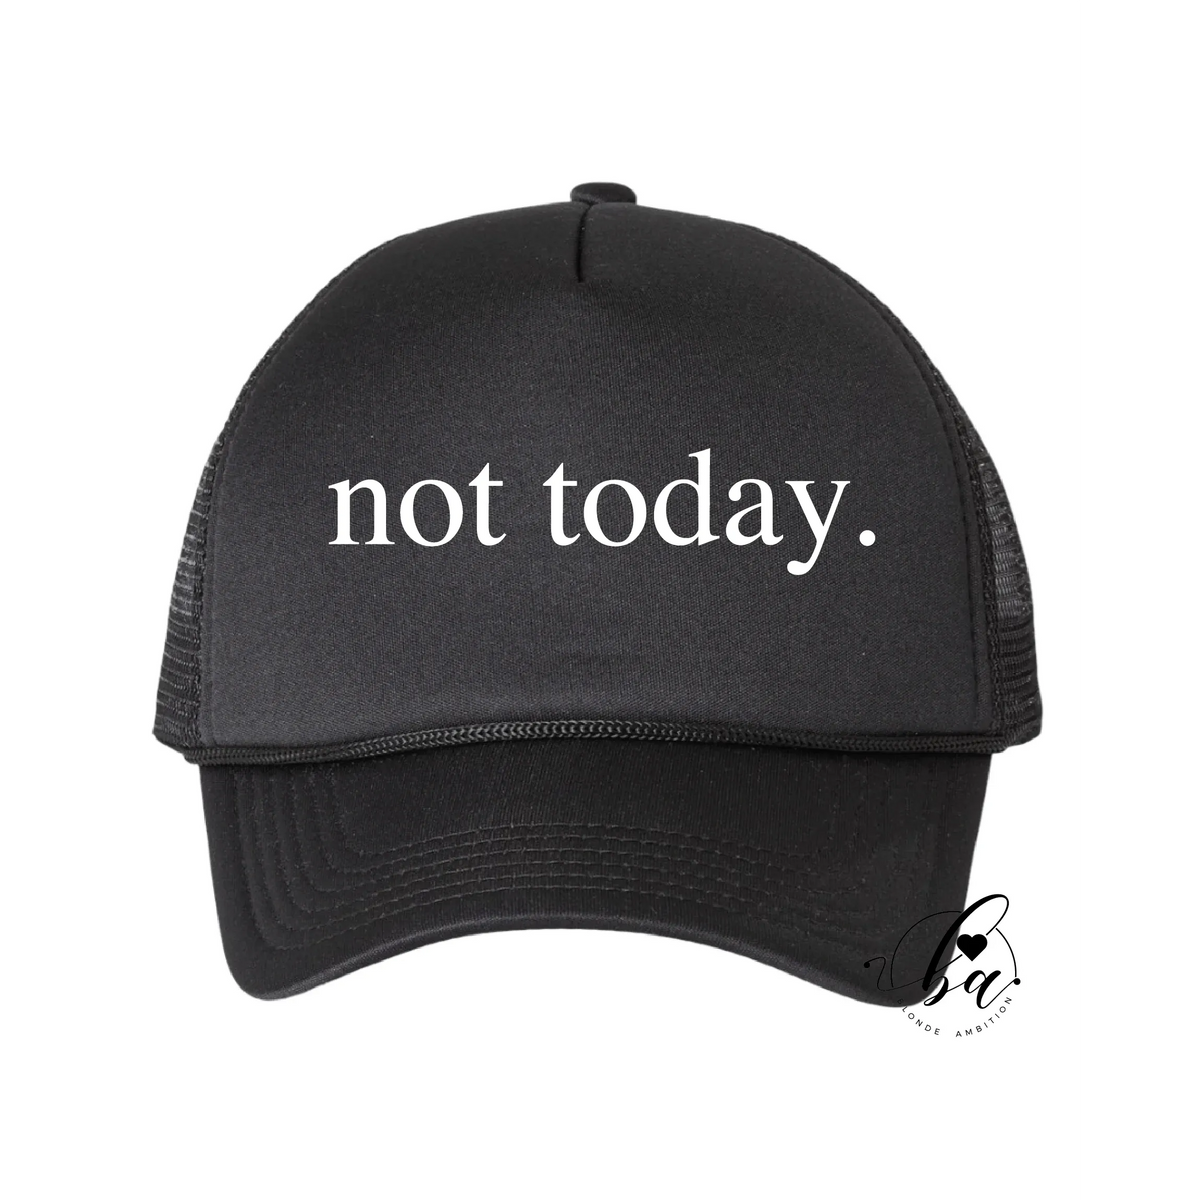 Blonde Ambition Black Not Today Cap